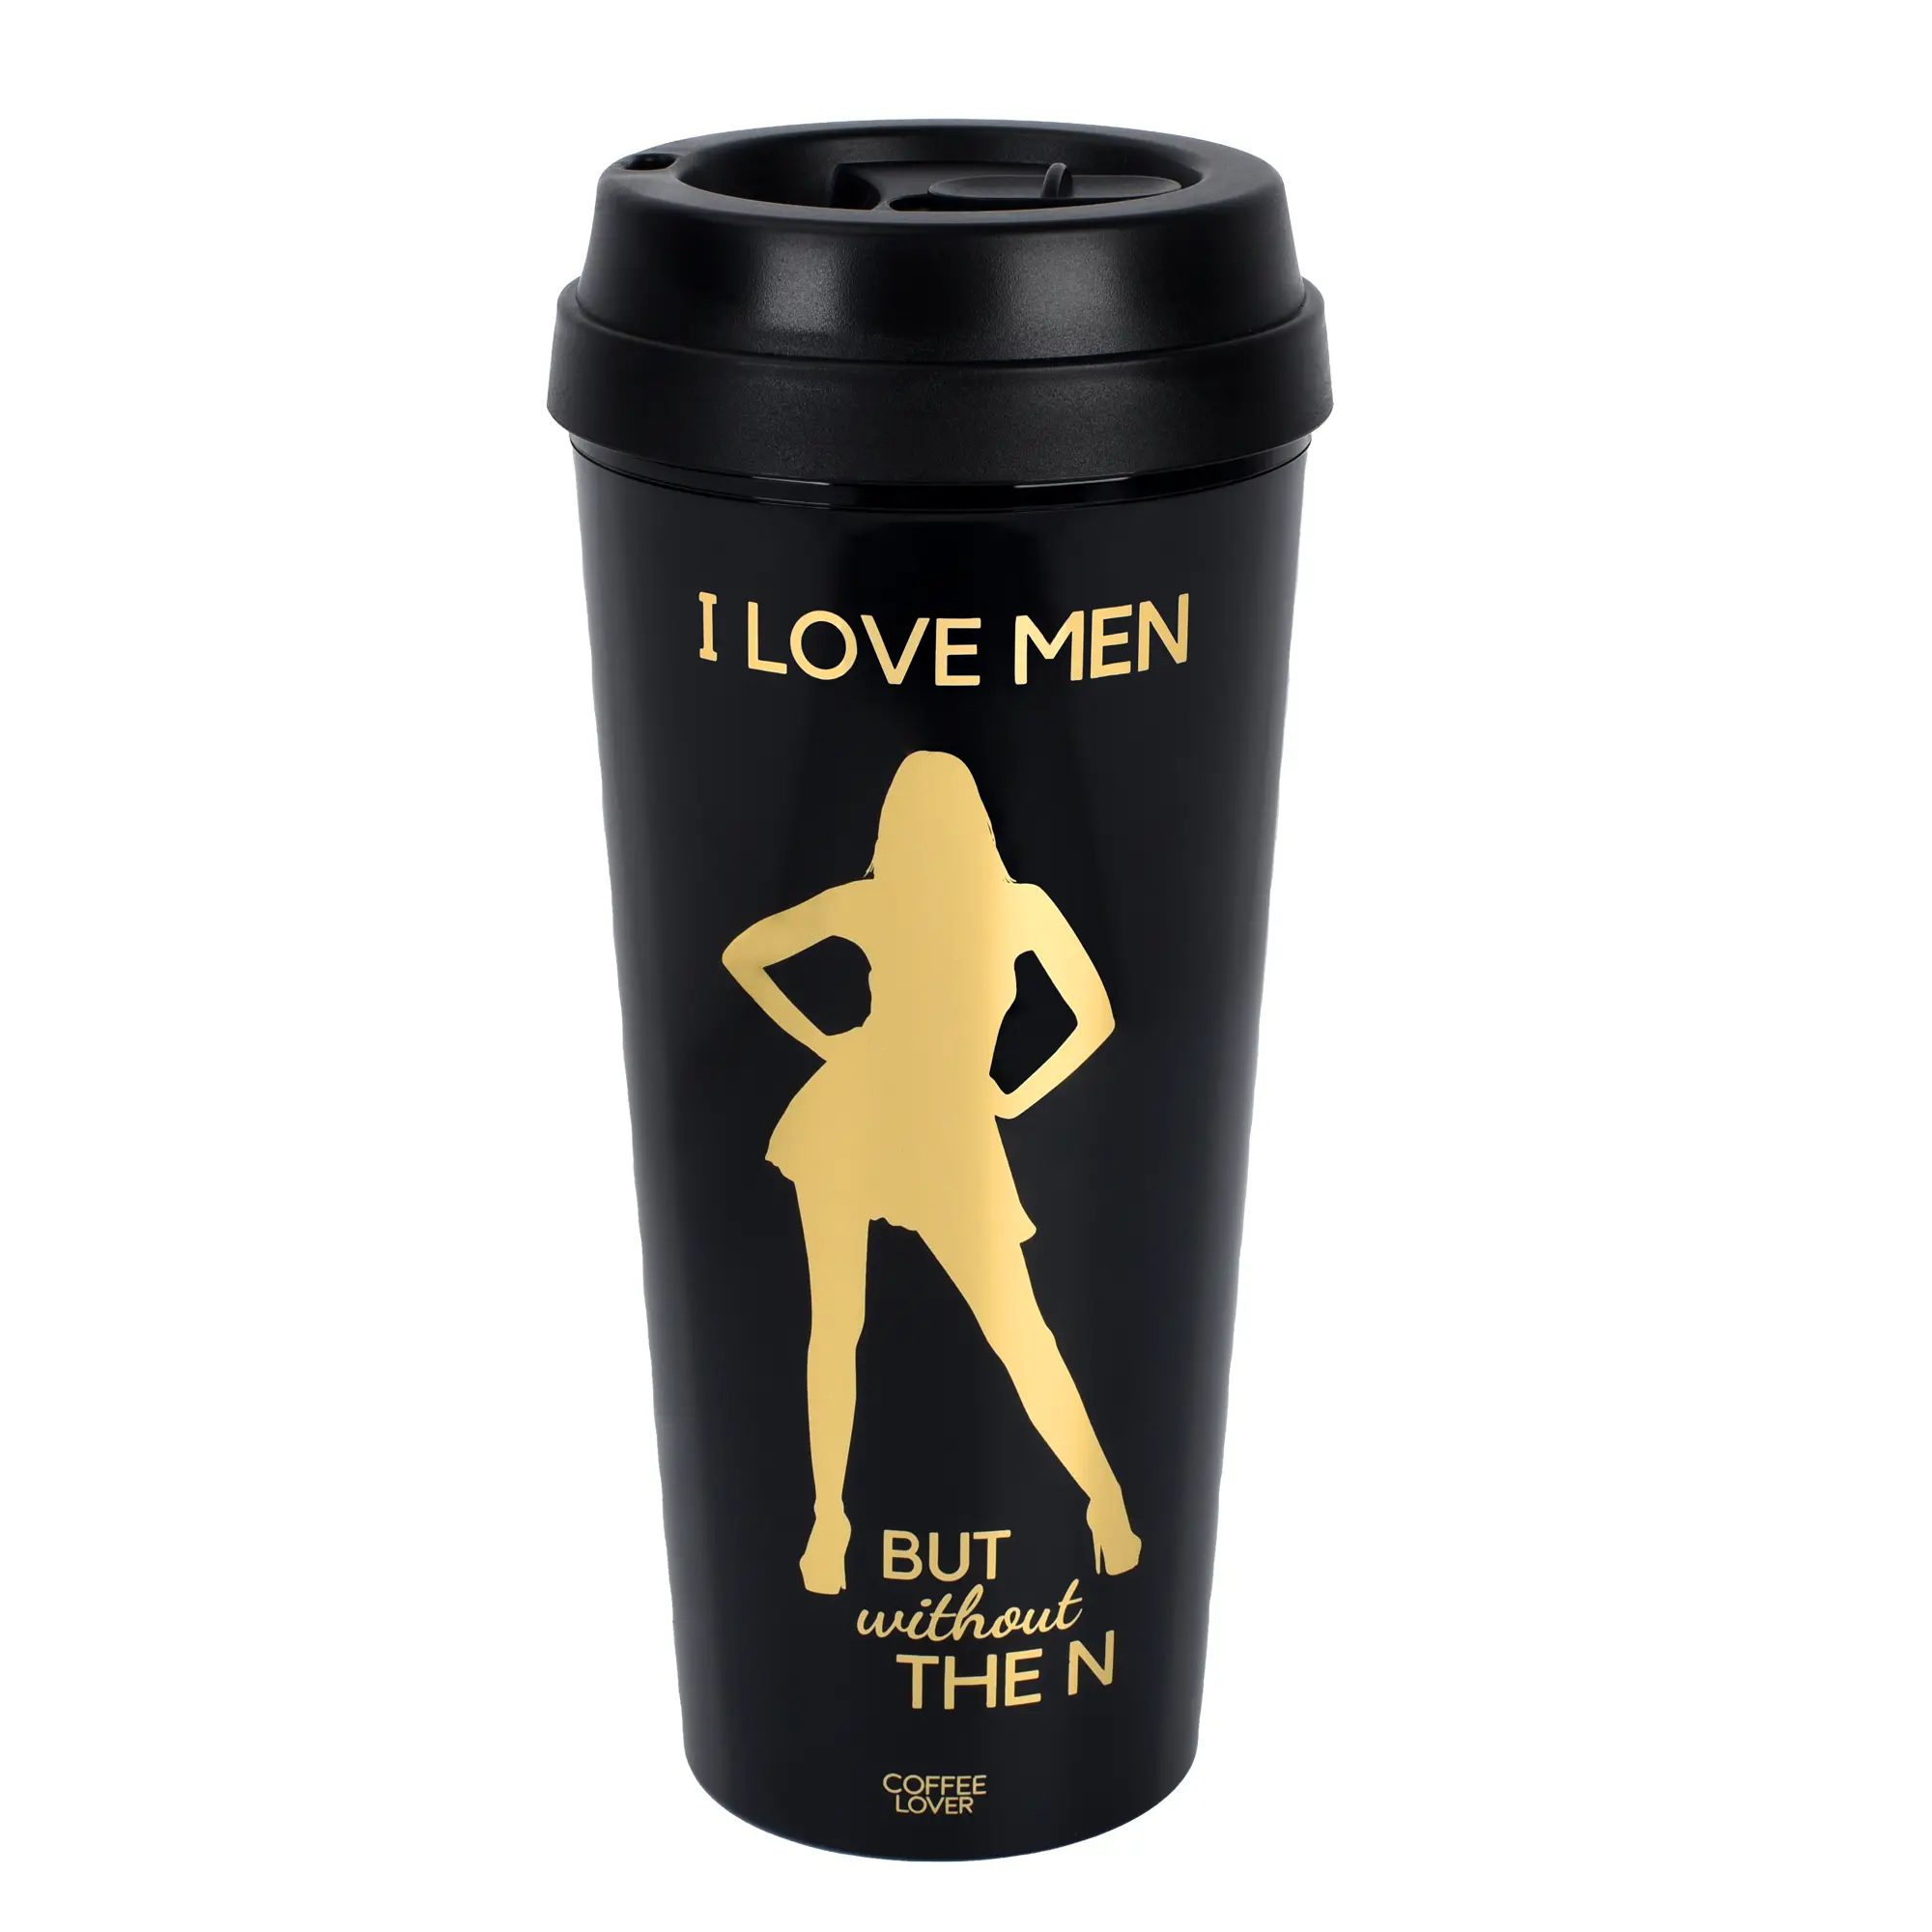 Kaffeebecher Love Men but N the without